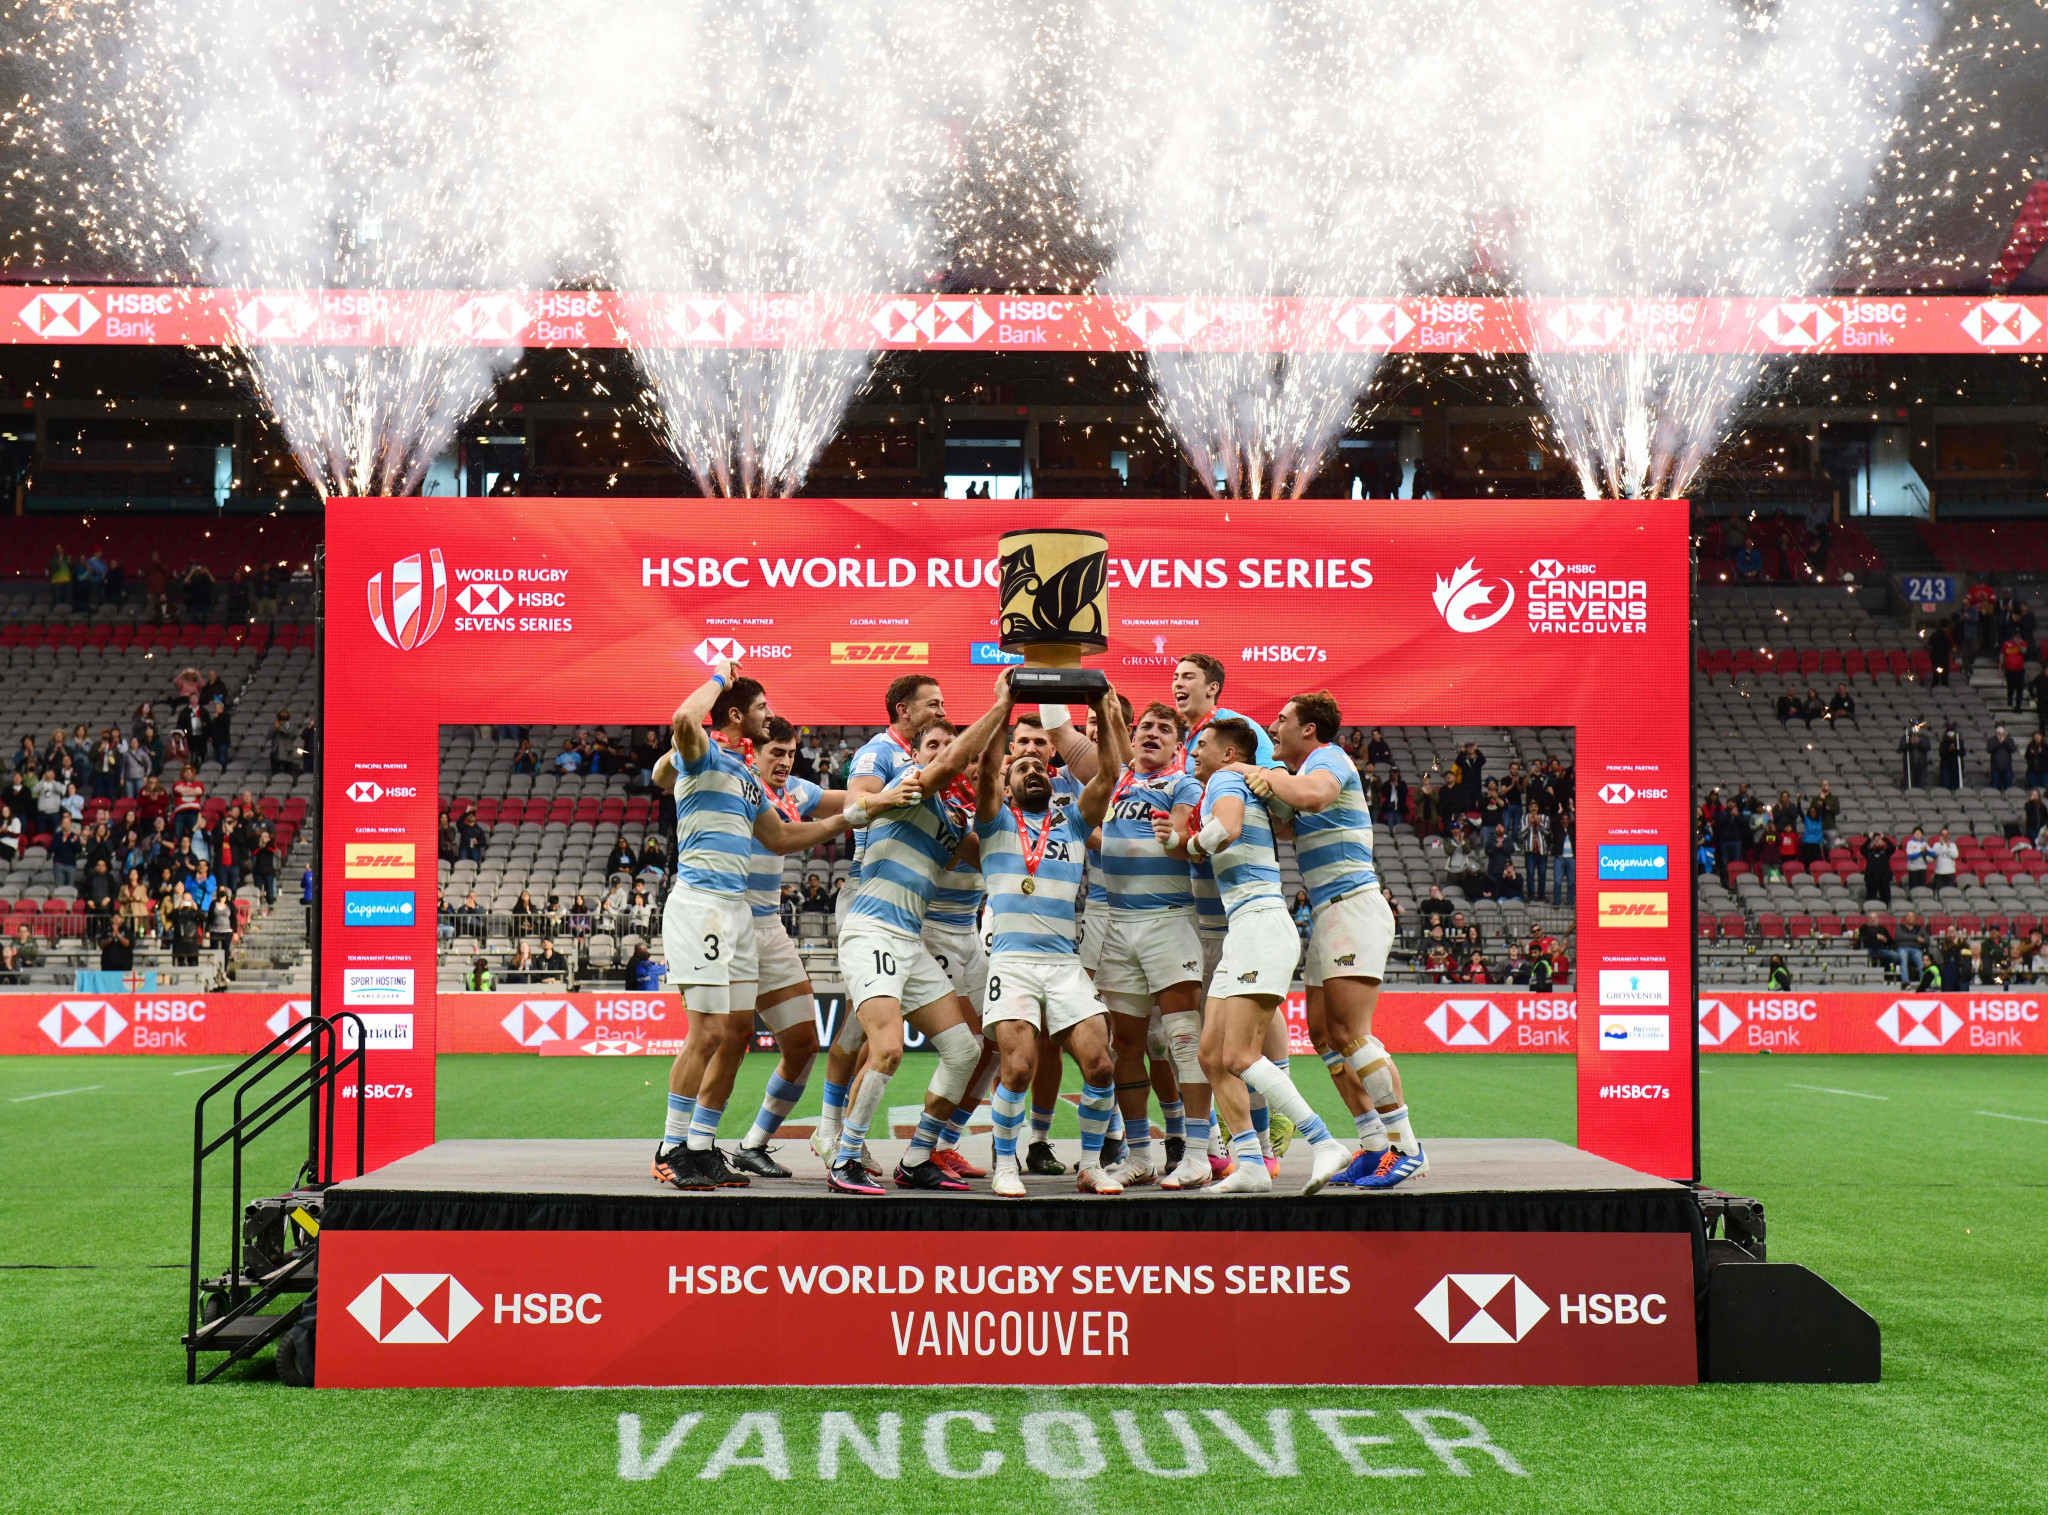 Argentina beat Olympic champions Fiji for first World Rugby Sevens Series win since 2009 in Vancouver